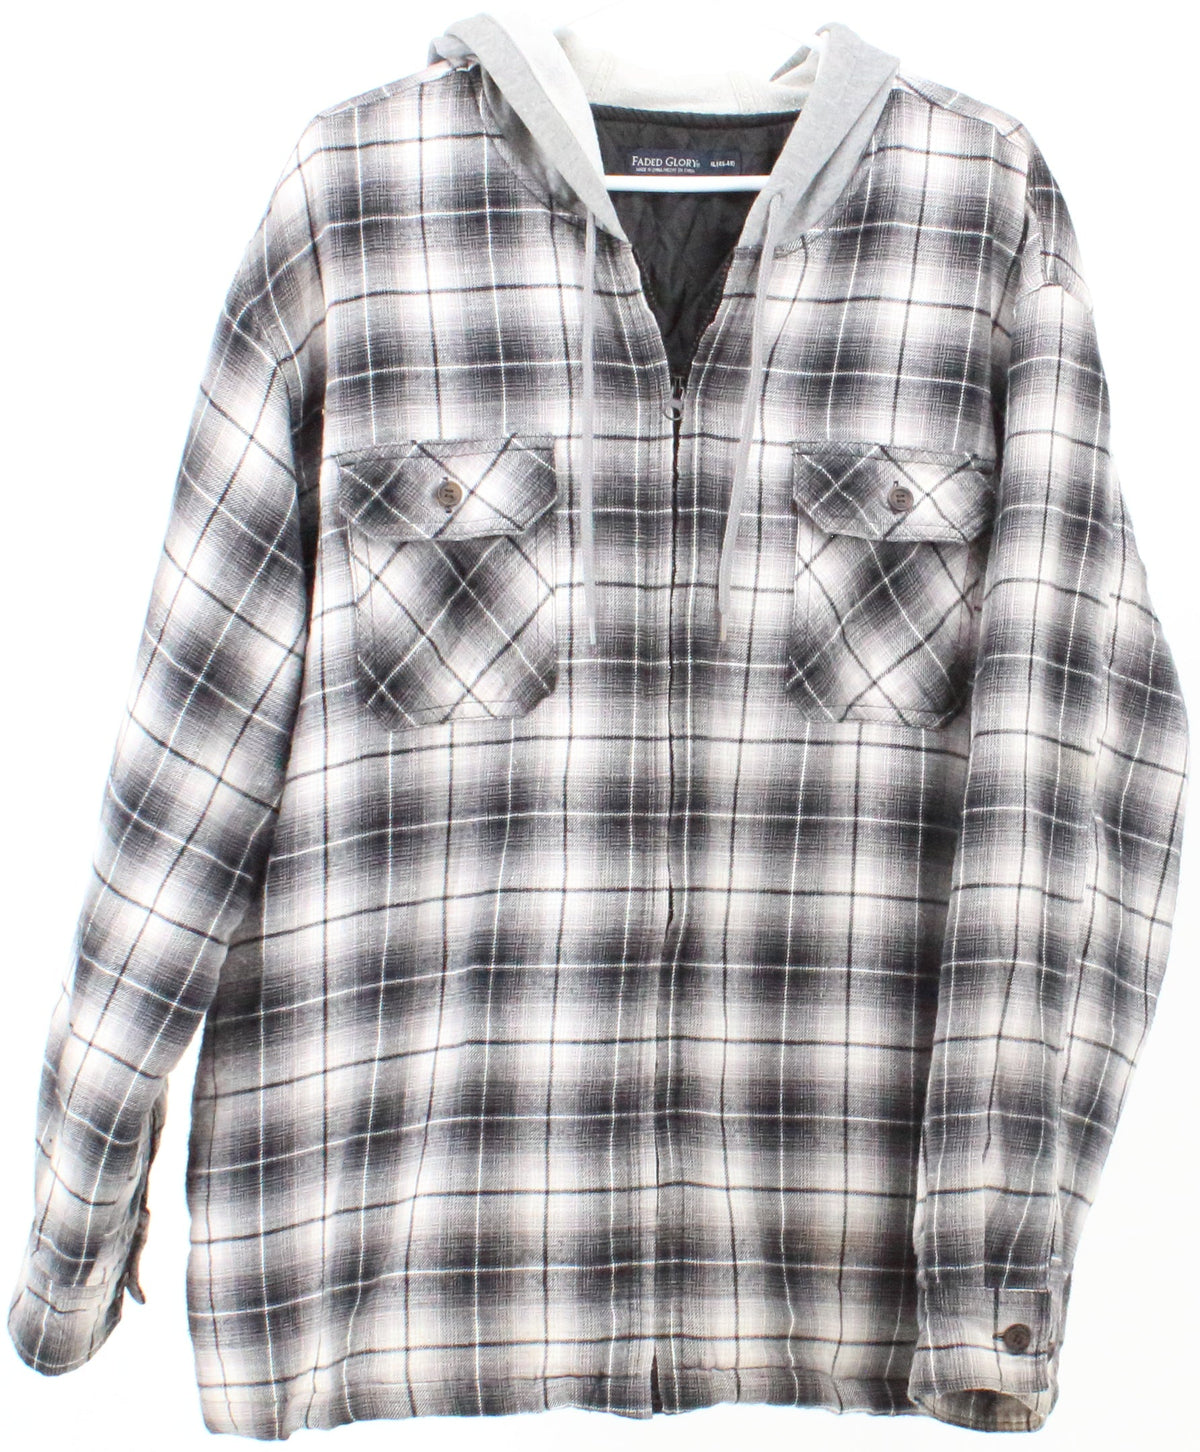 Faded Glory White and Black Plaid Hooded Shirt With Quilt Lining